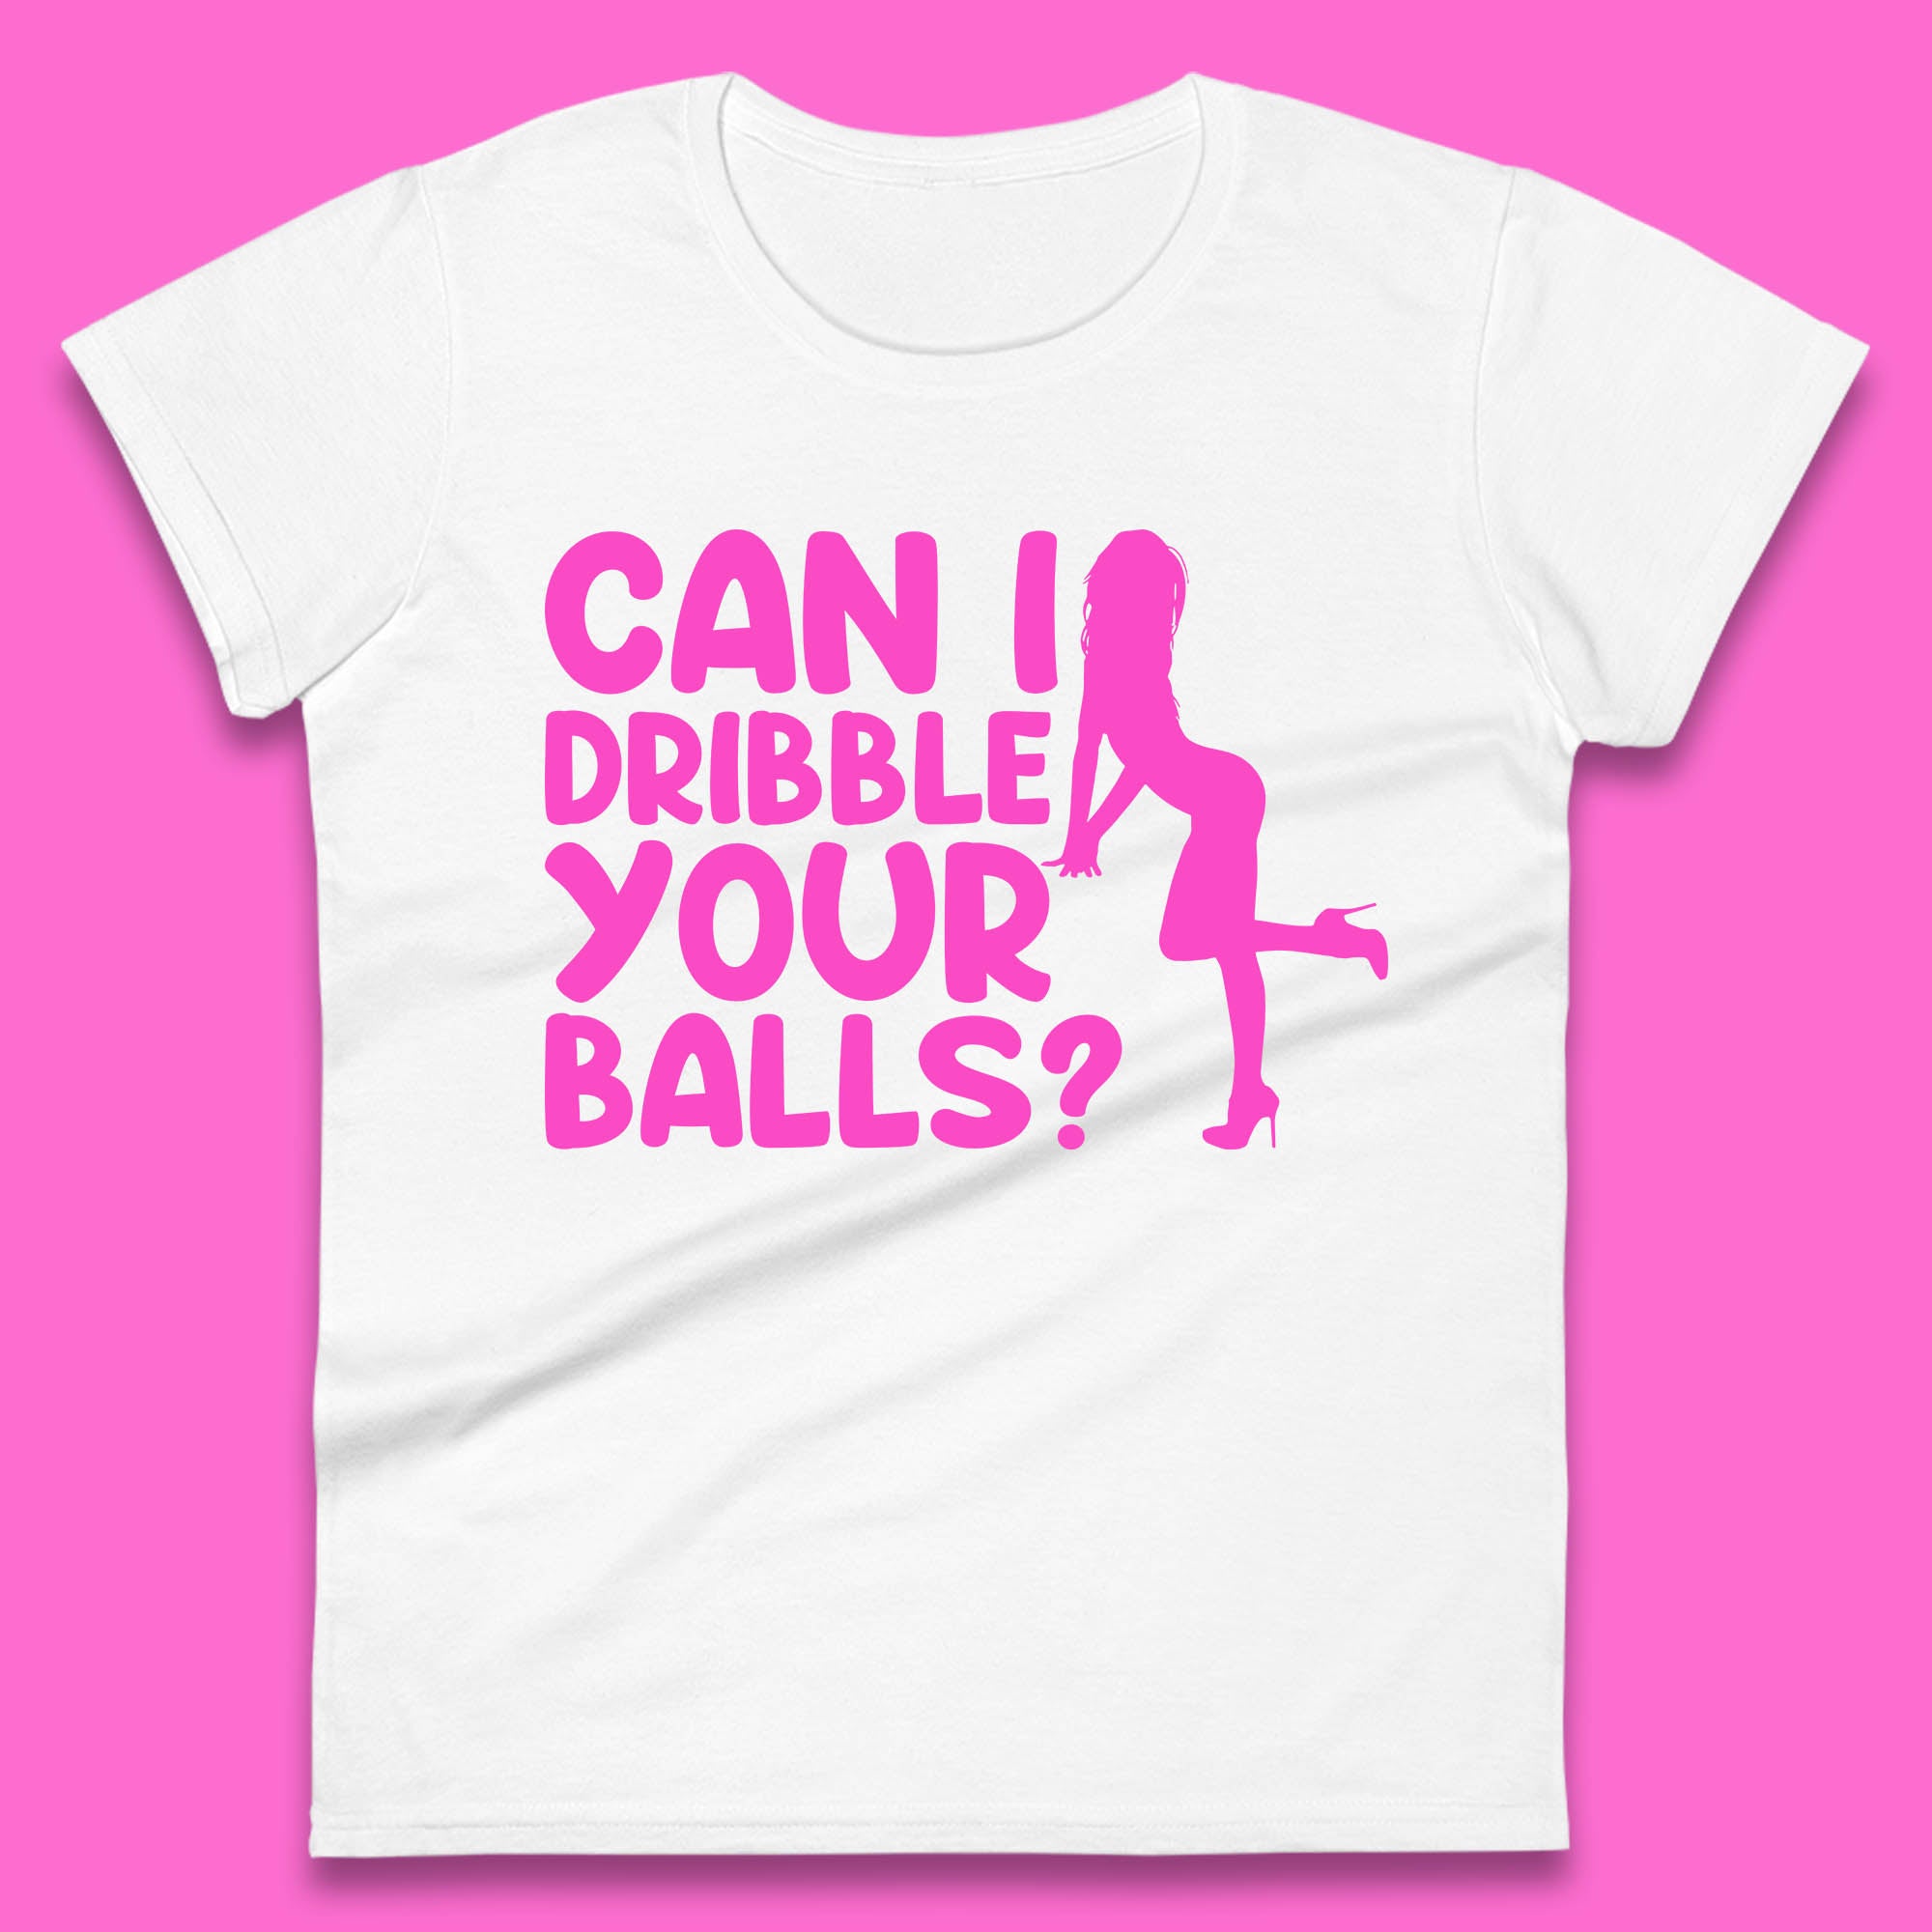 Can I Dribble You Balls? Offensive Adult Humor Gift Womens Tee Top